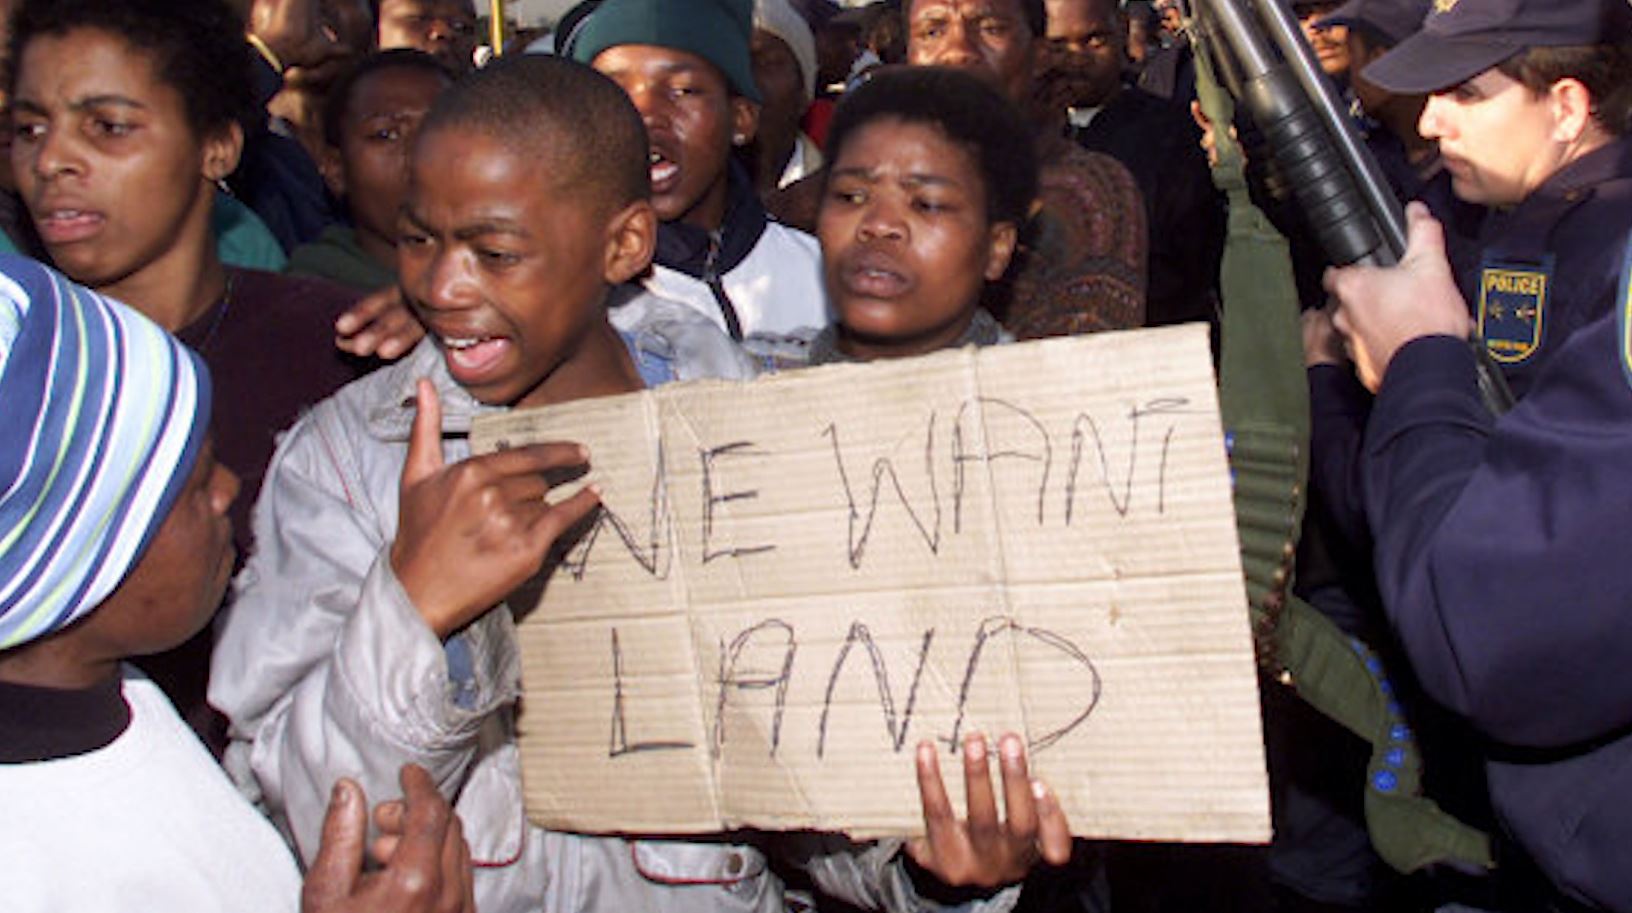 community members from elandskloof protesting for the return of their land